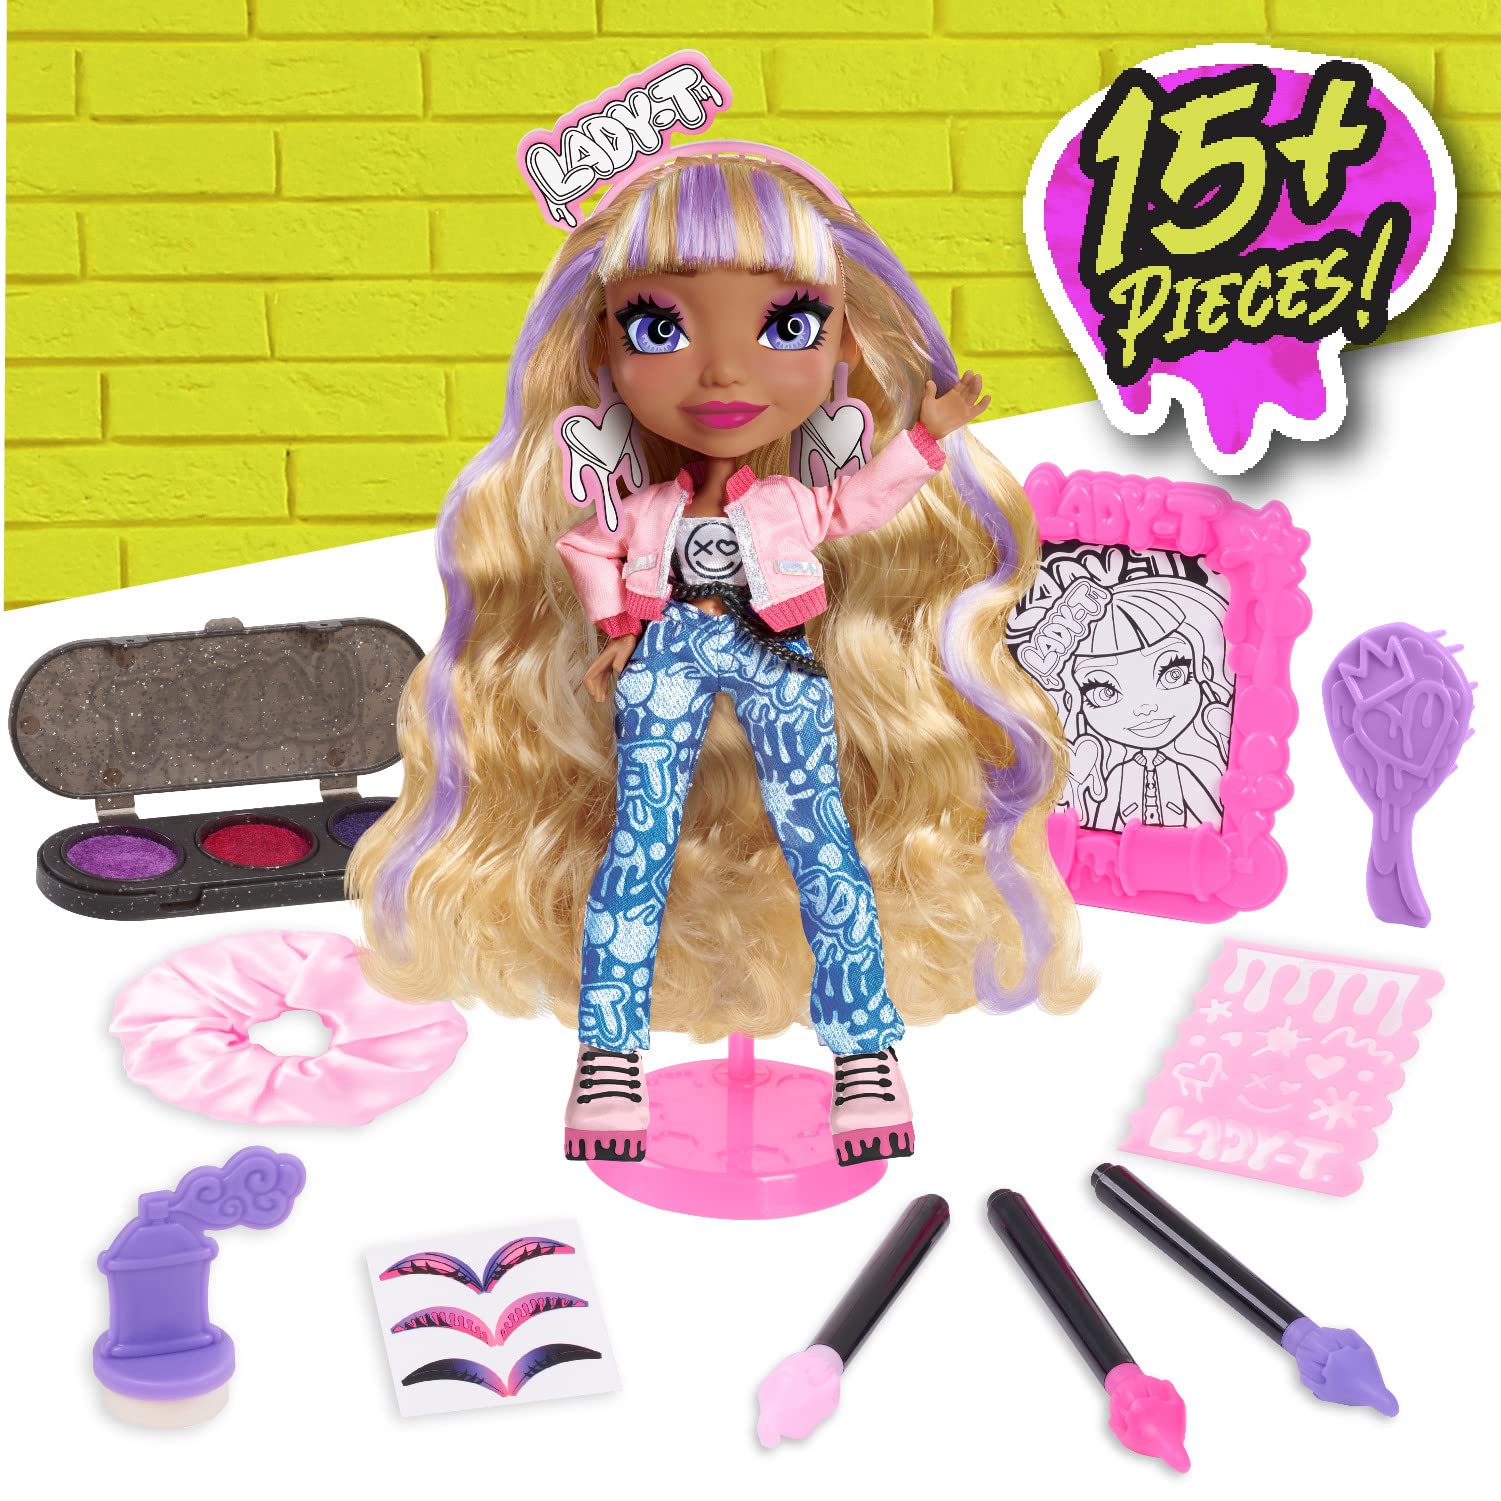 ART SQUAD Lady T 10-inch Doll & Accessories with DIY Craft Stencil Project, Kids Toys for Ages 3 Up, Gifts and Presents by Just Play